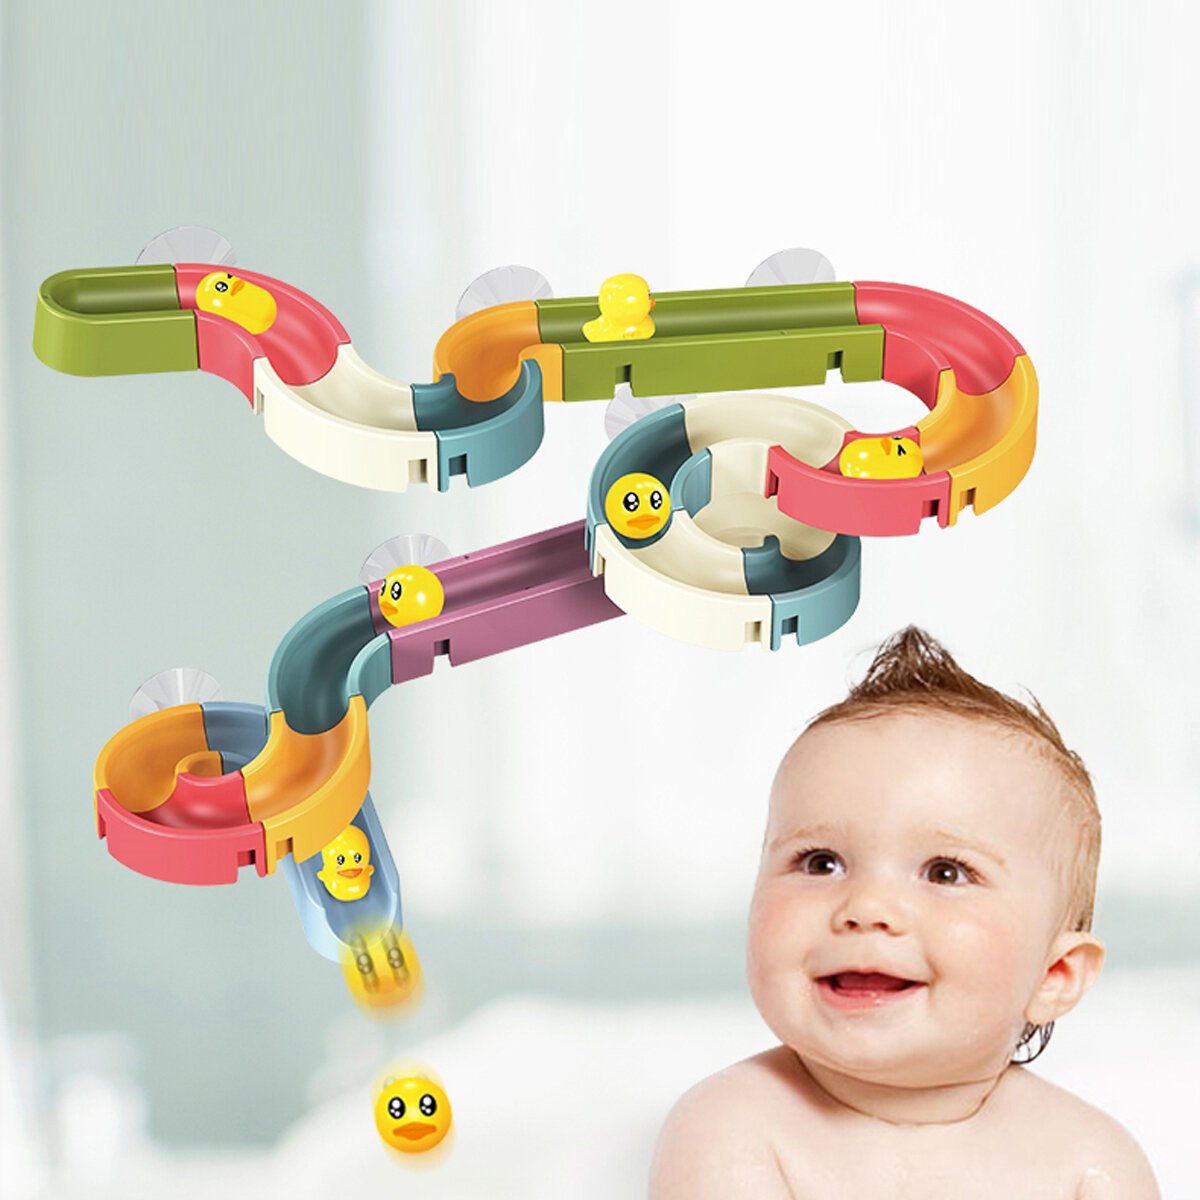 Rich Color Baby Bathroom Duck Play Water Track Slideway Game DIY Assembly Puzzle Early Education Set Toy for Kids Gift